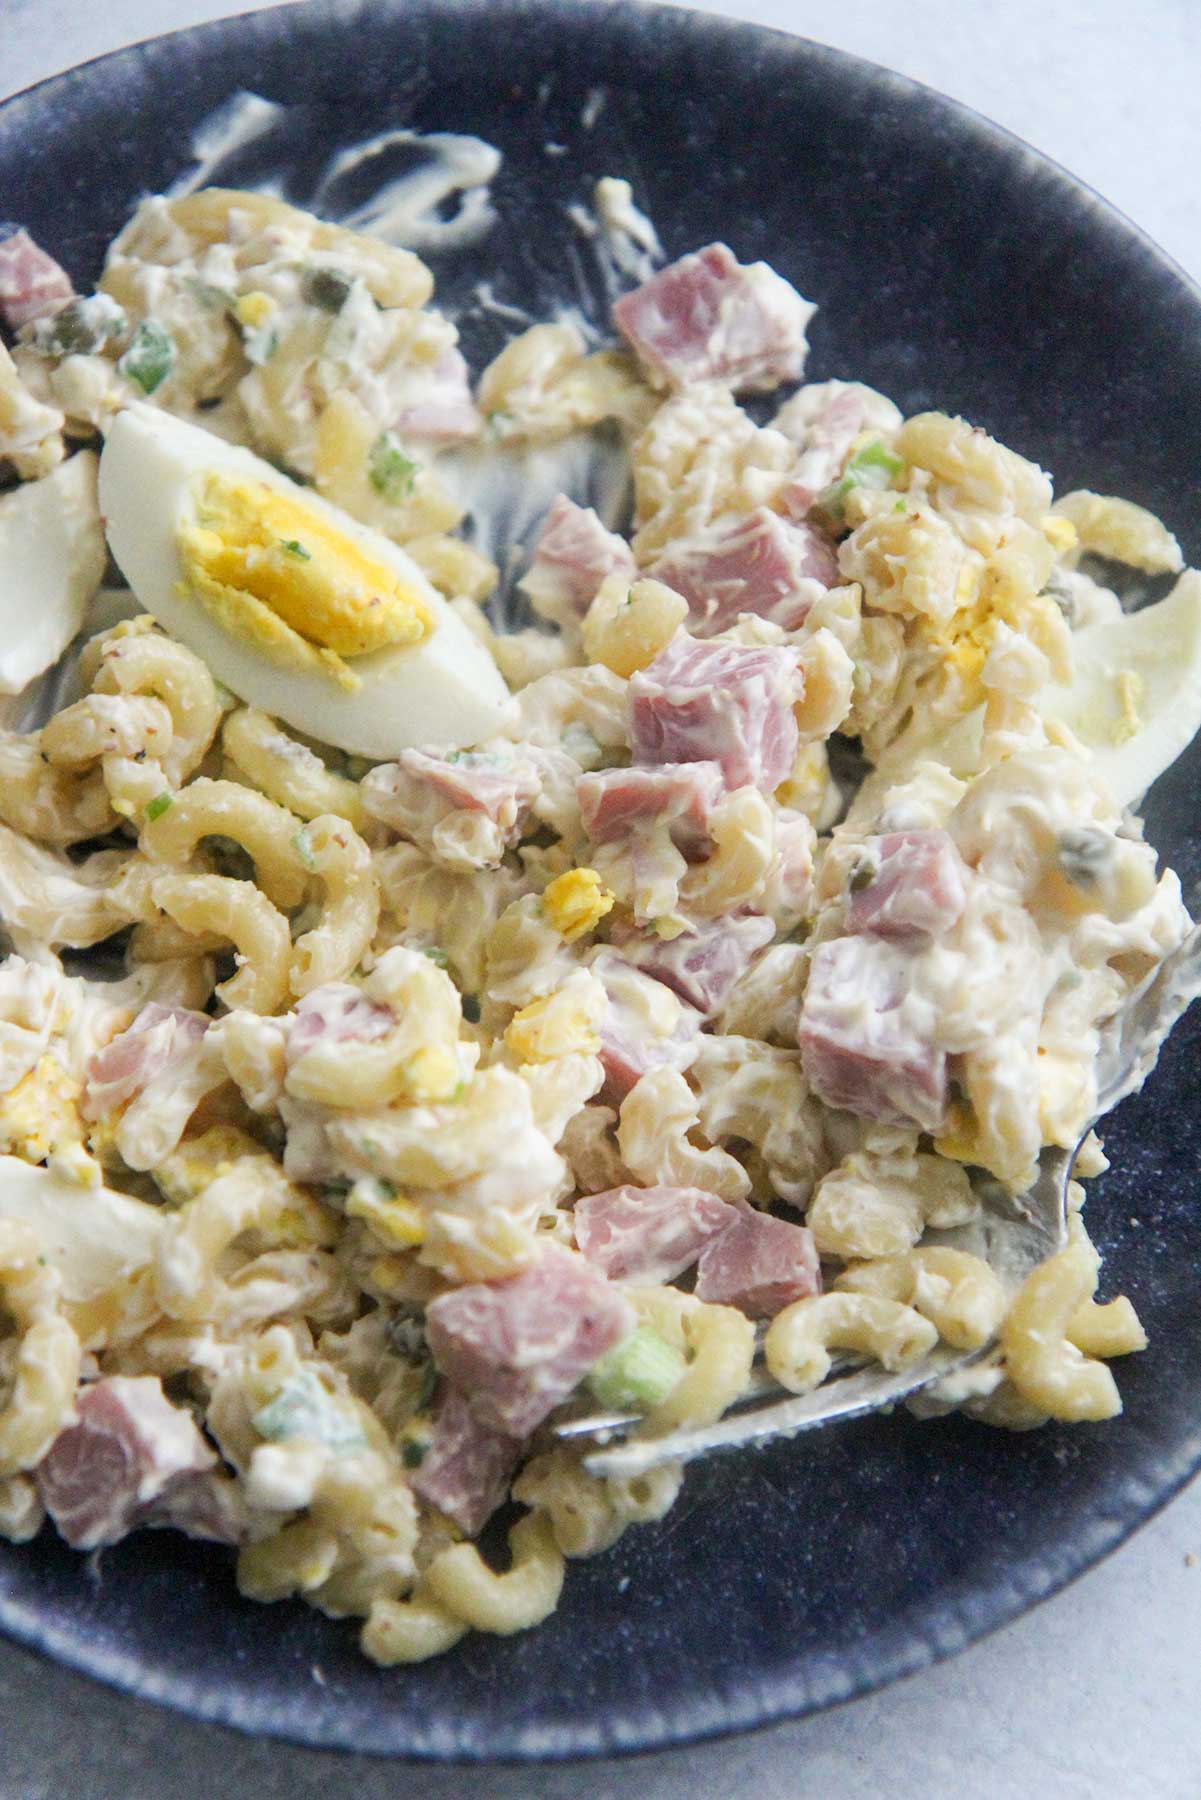 Macaroni salad with ham and eggs on a blue plate.